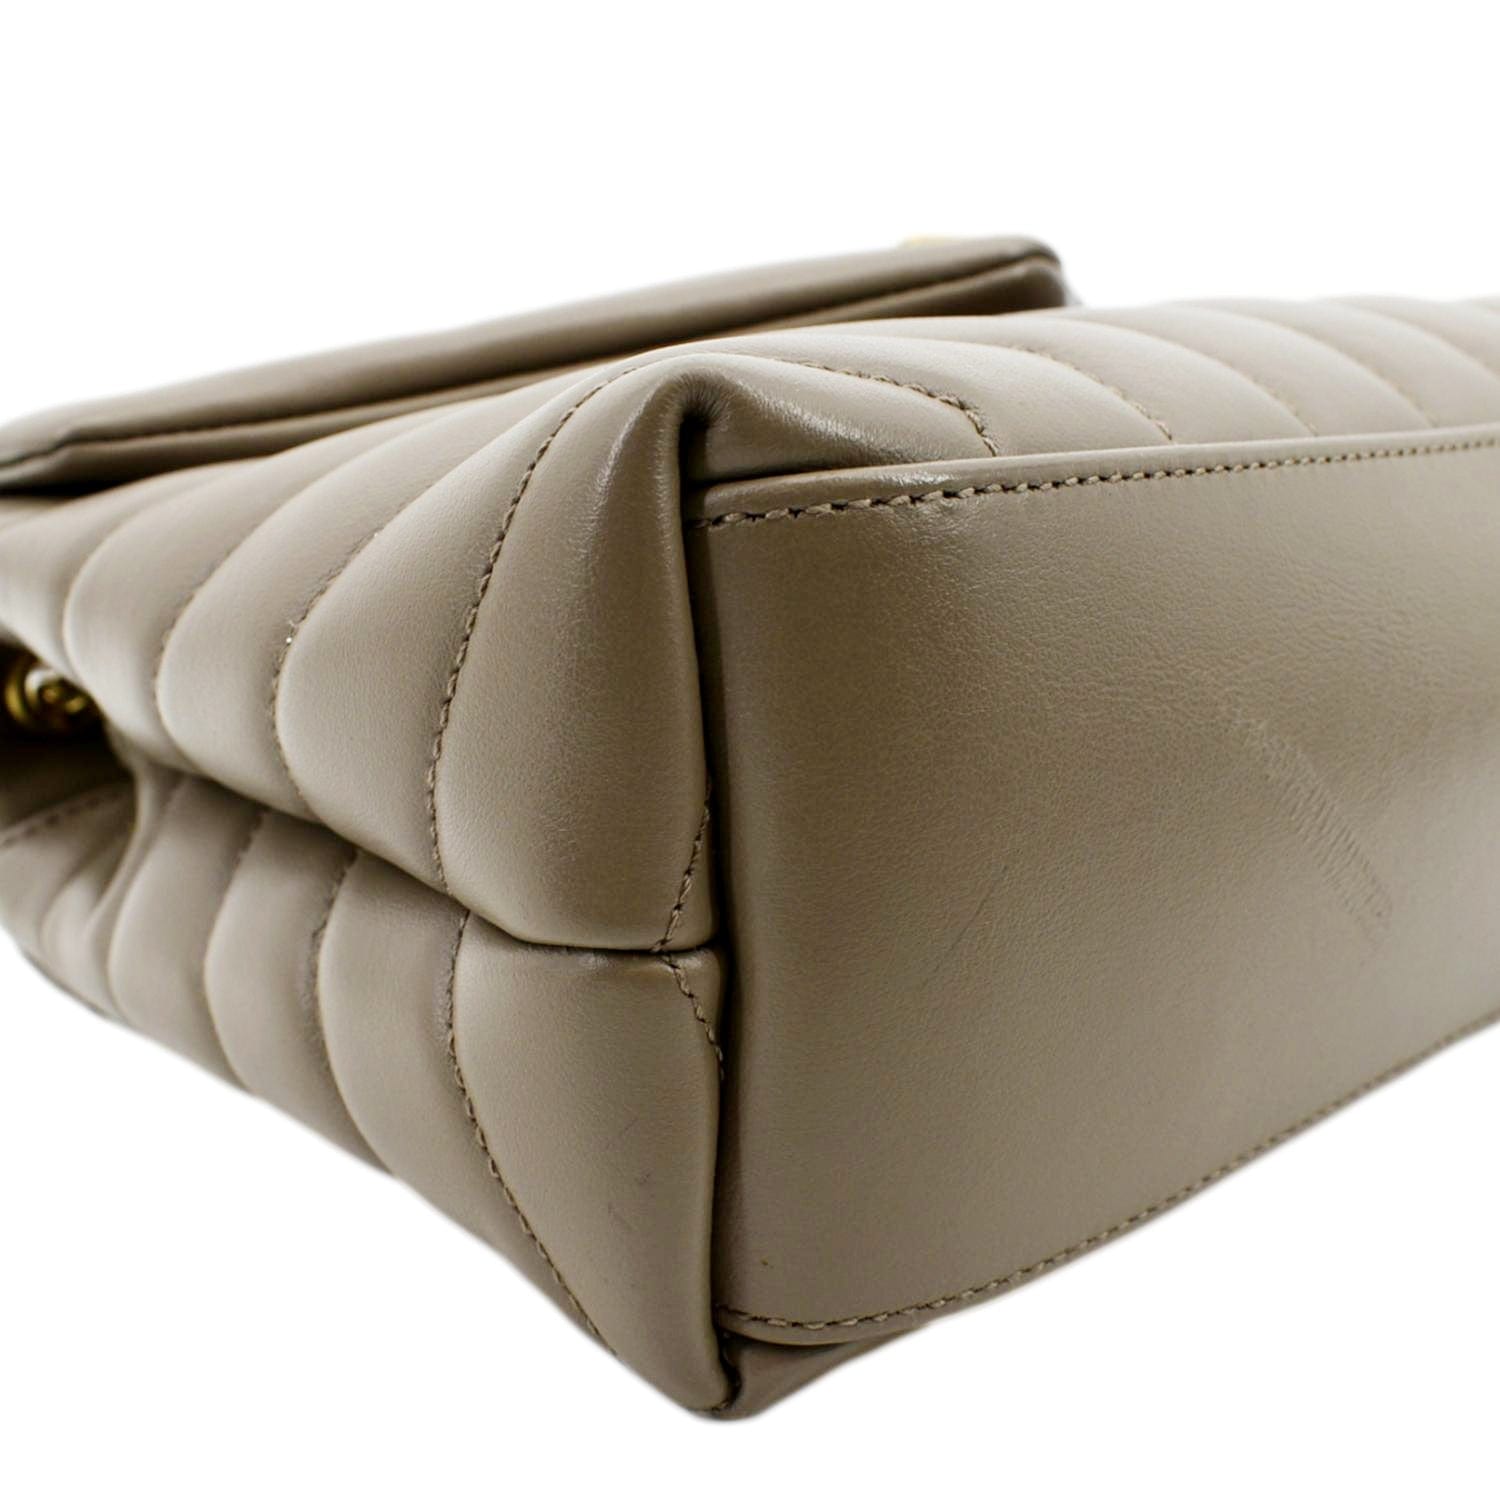 Yves Saint Laurent Beige Chevron Quilted Leather Toy LouLou